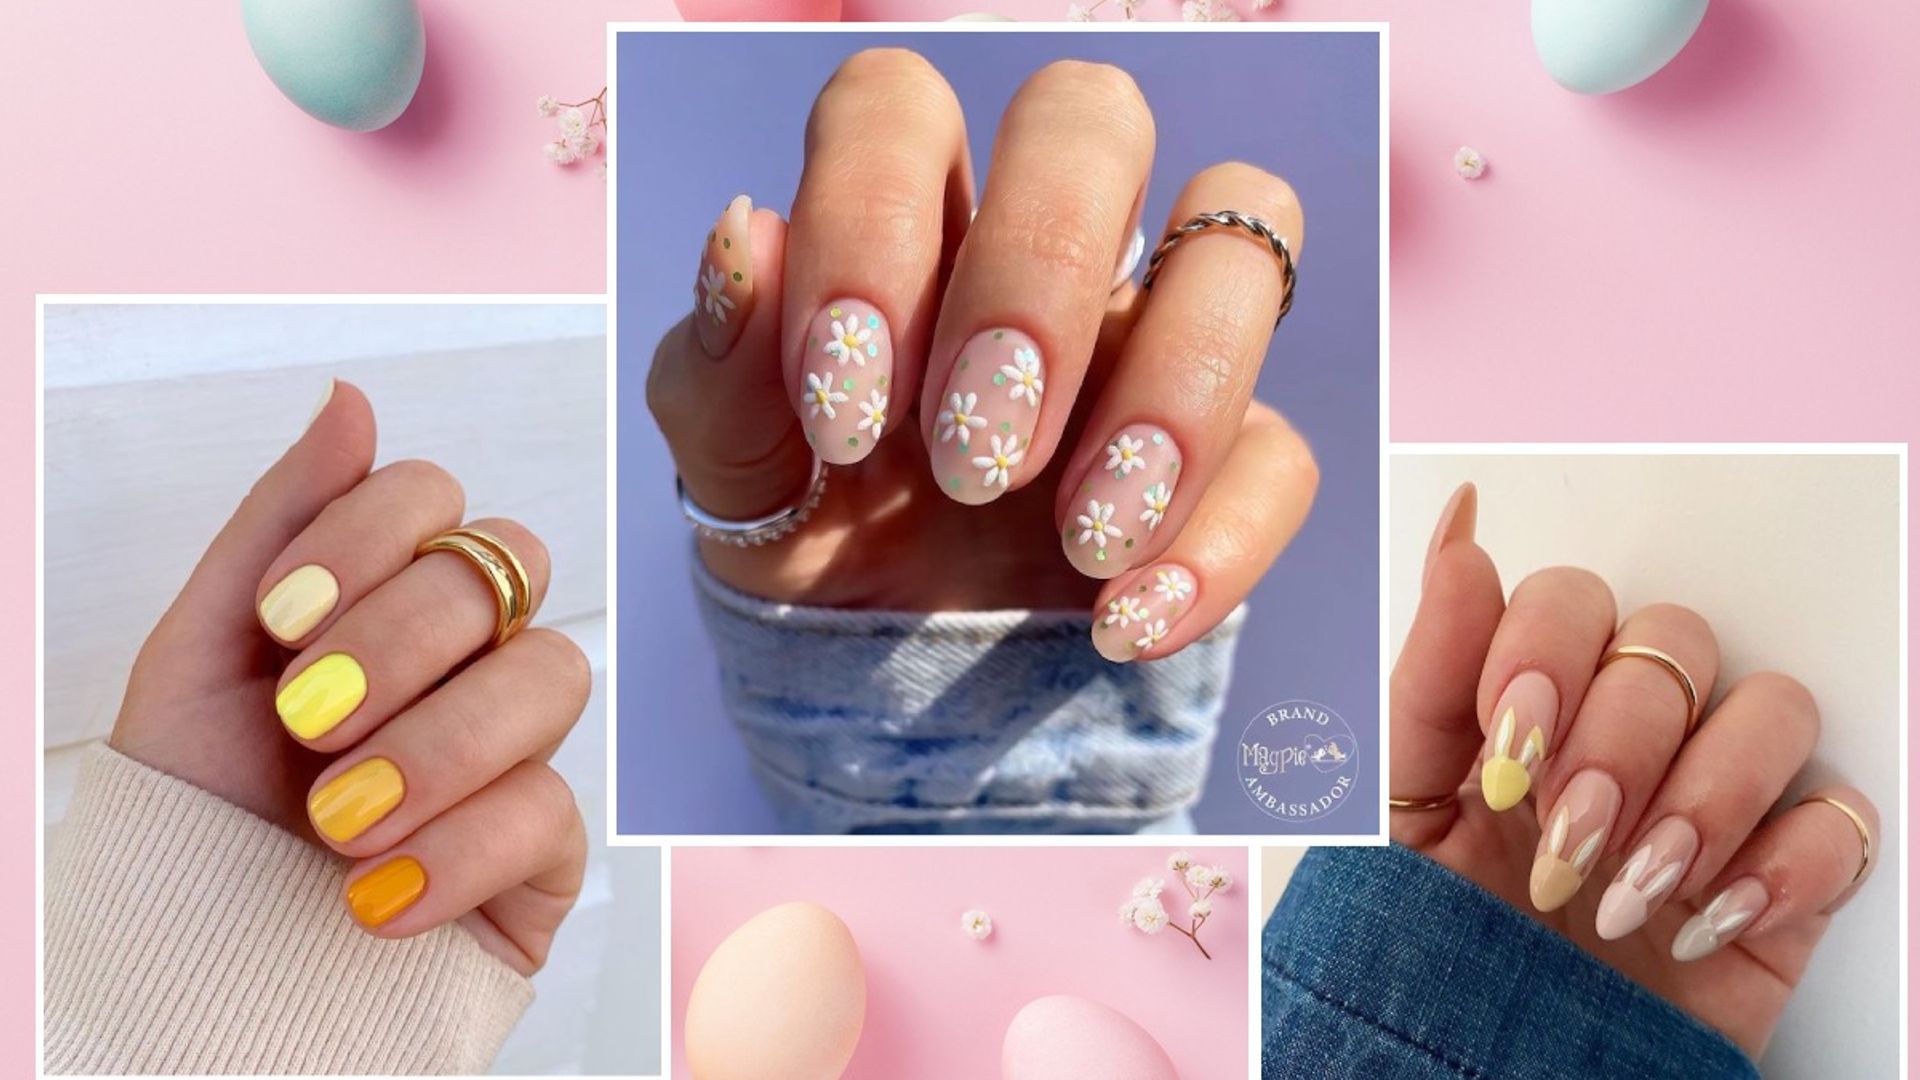 7 adorable Easter nail art ideas you'll fall in love with